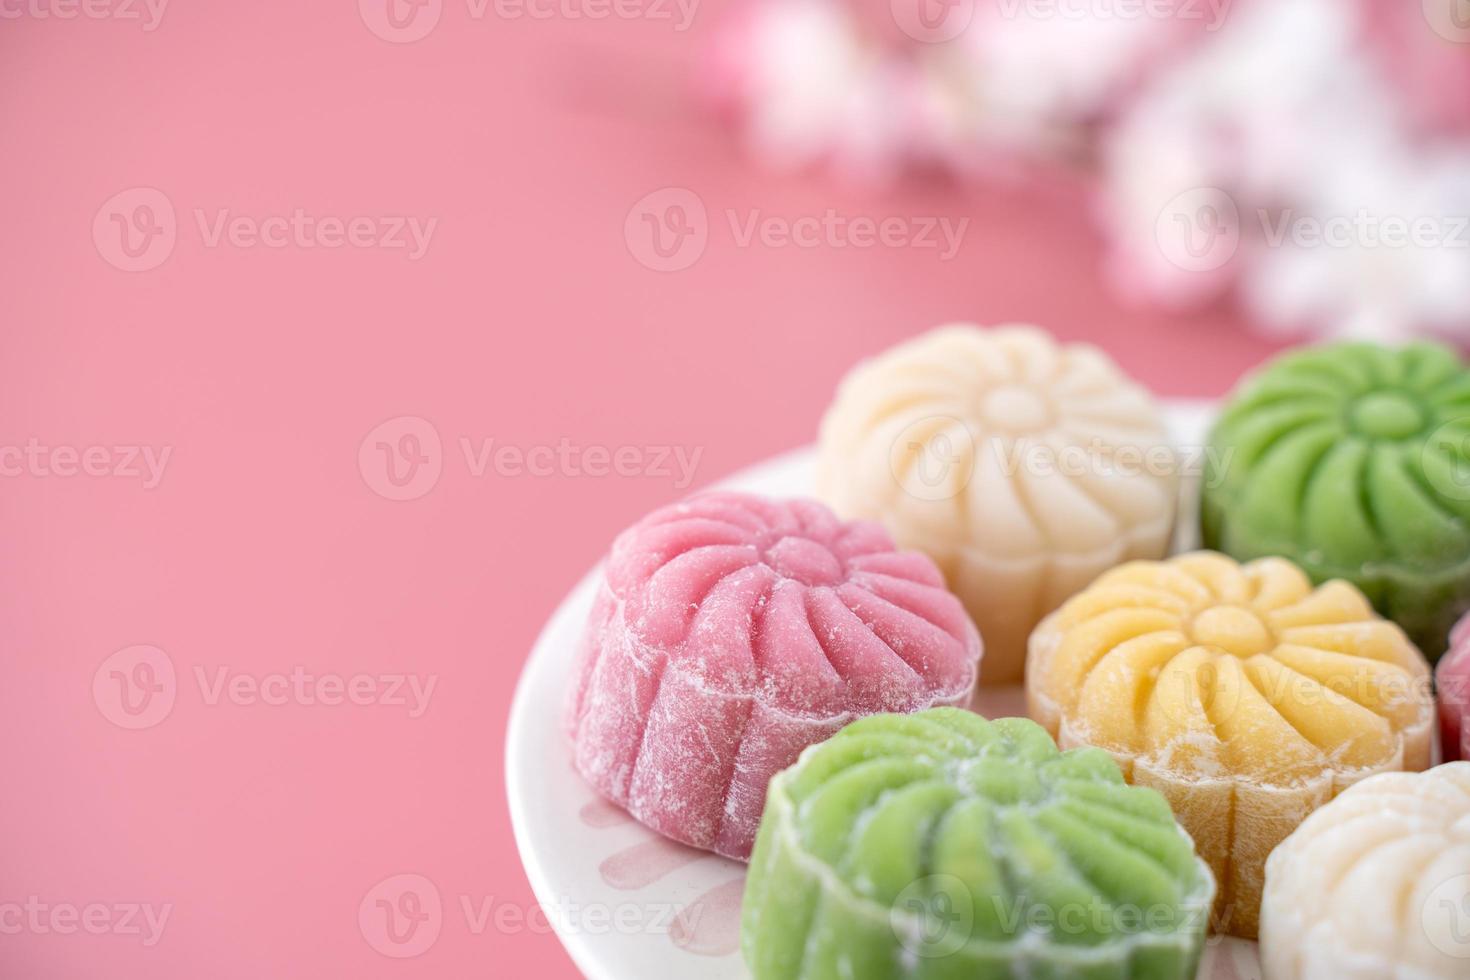 Colorful snow skin moon cake, sweet snowy mooncake, traditional savory dessert for Mid-Autumn Festival on pastel pale pink background, close up, lifestyle. photo